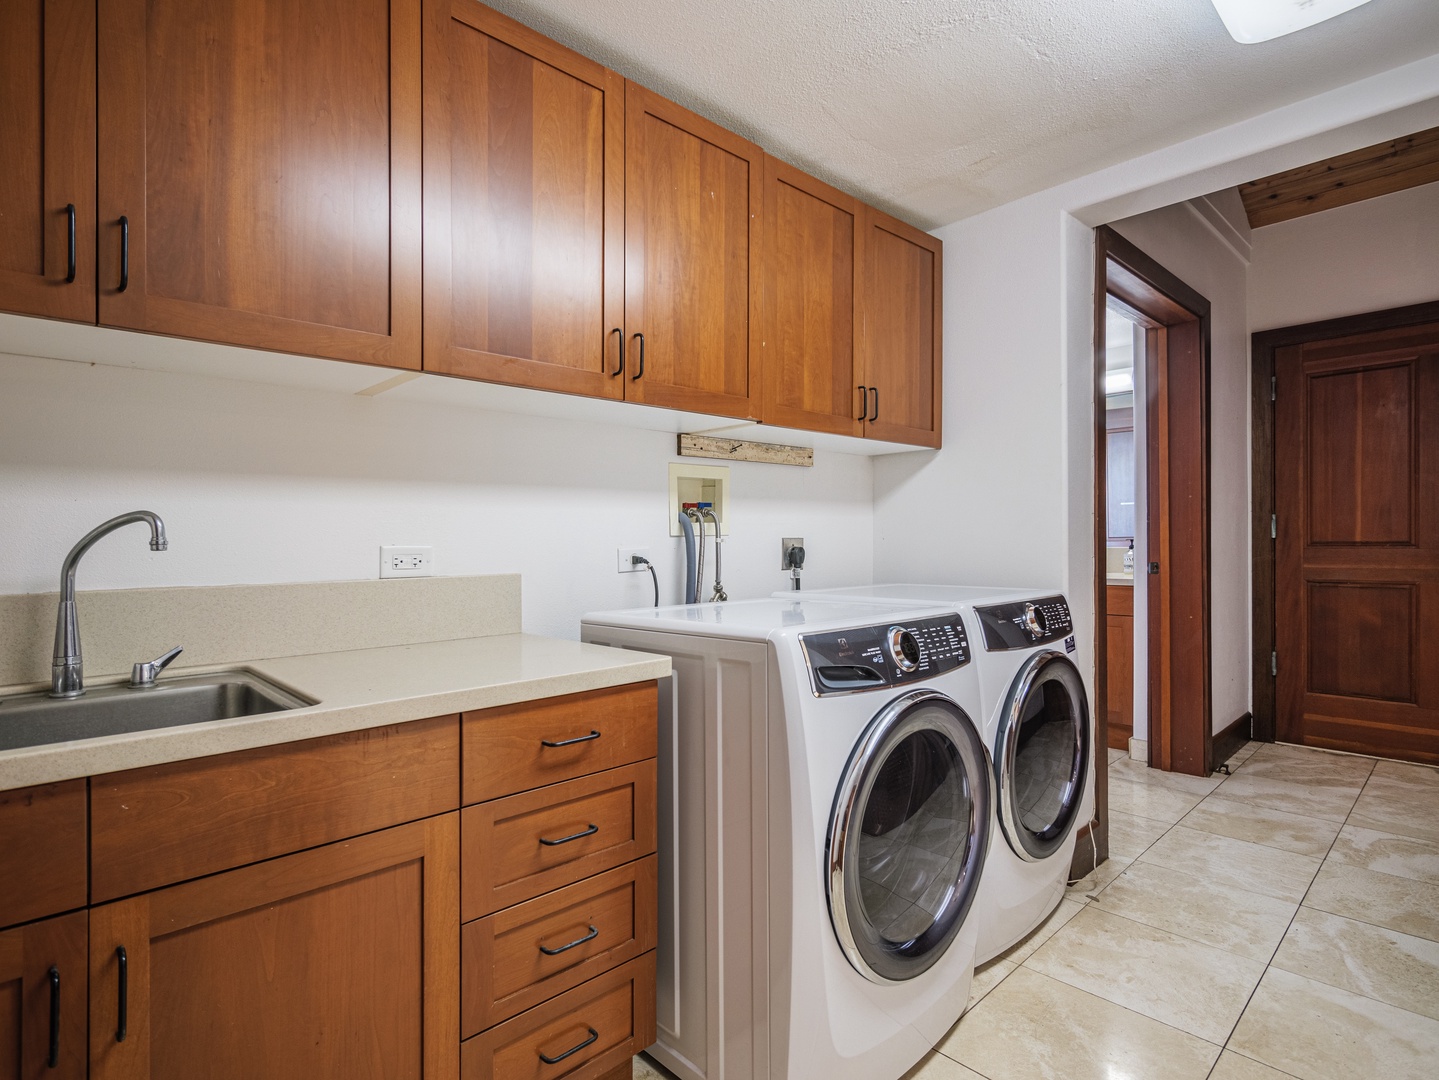 Waianae Vacation Rentals, Konishiki Beachhouse - In-unit washer/dryer in the laundry room.